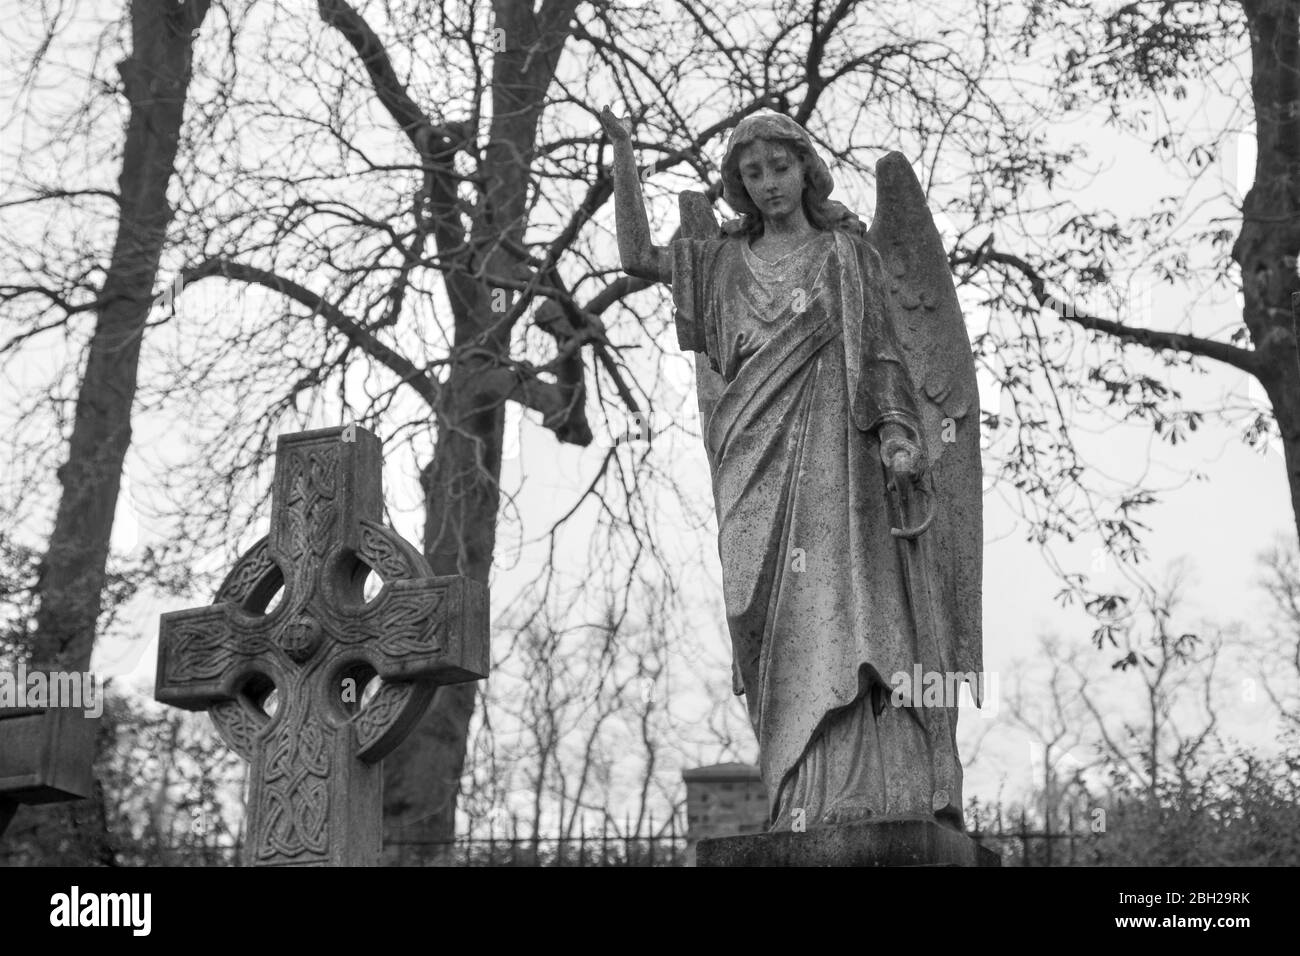 Highgate cemetery Black and White Stock Photos & Images - Alamy